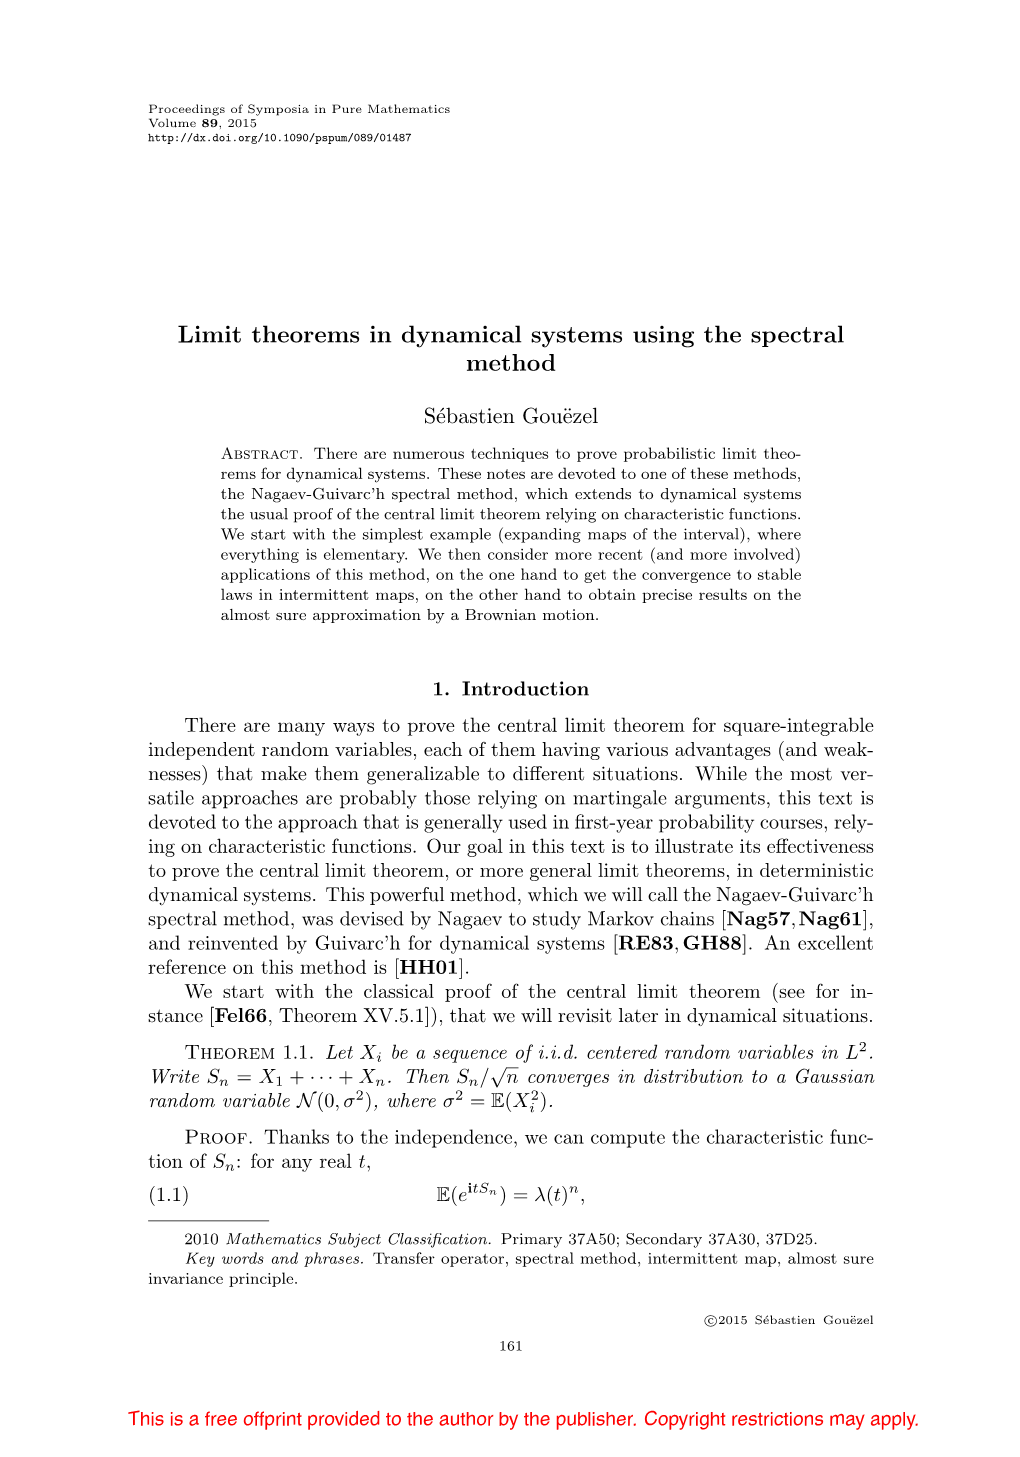 Limit Theorems in Dynamical Systems Using the Spectral Method